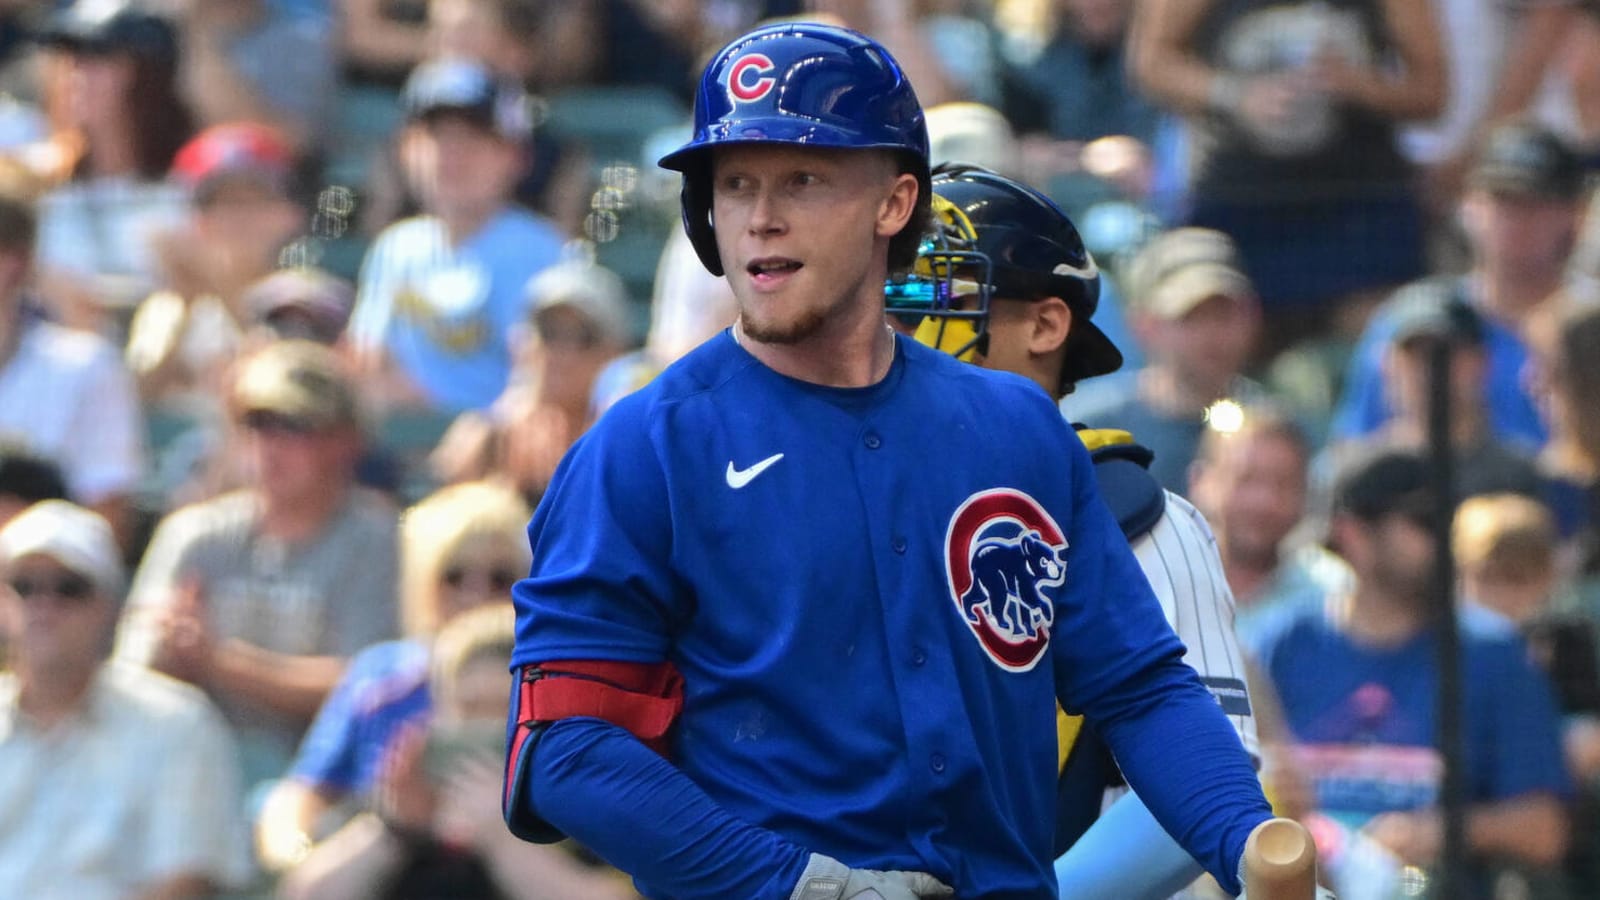 Rising stars for the Chicago Cubs